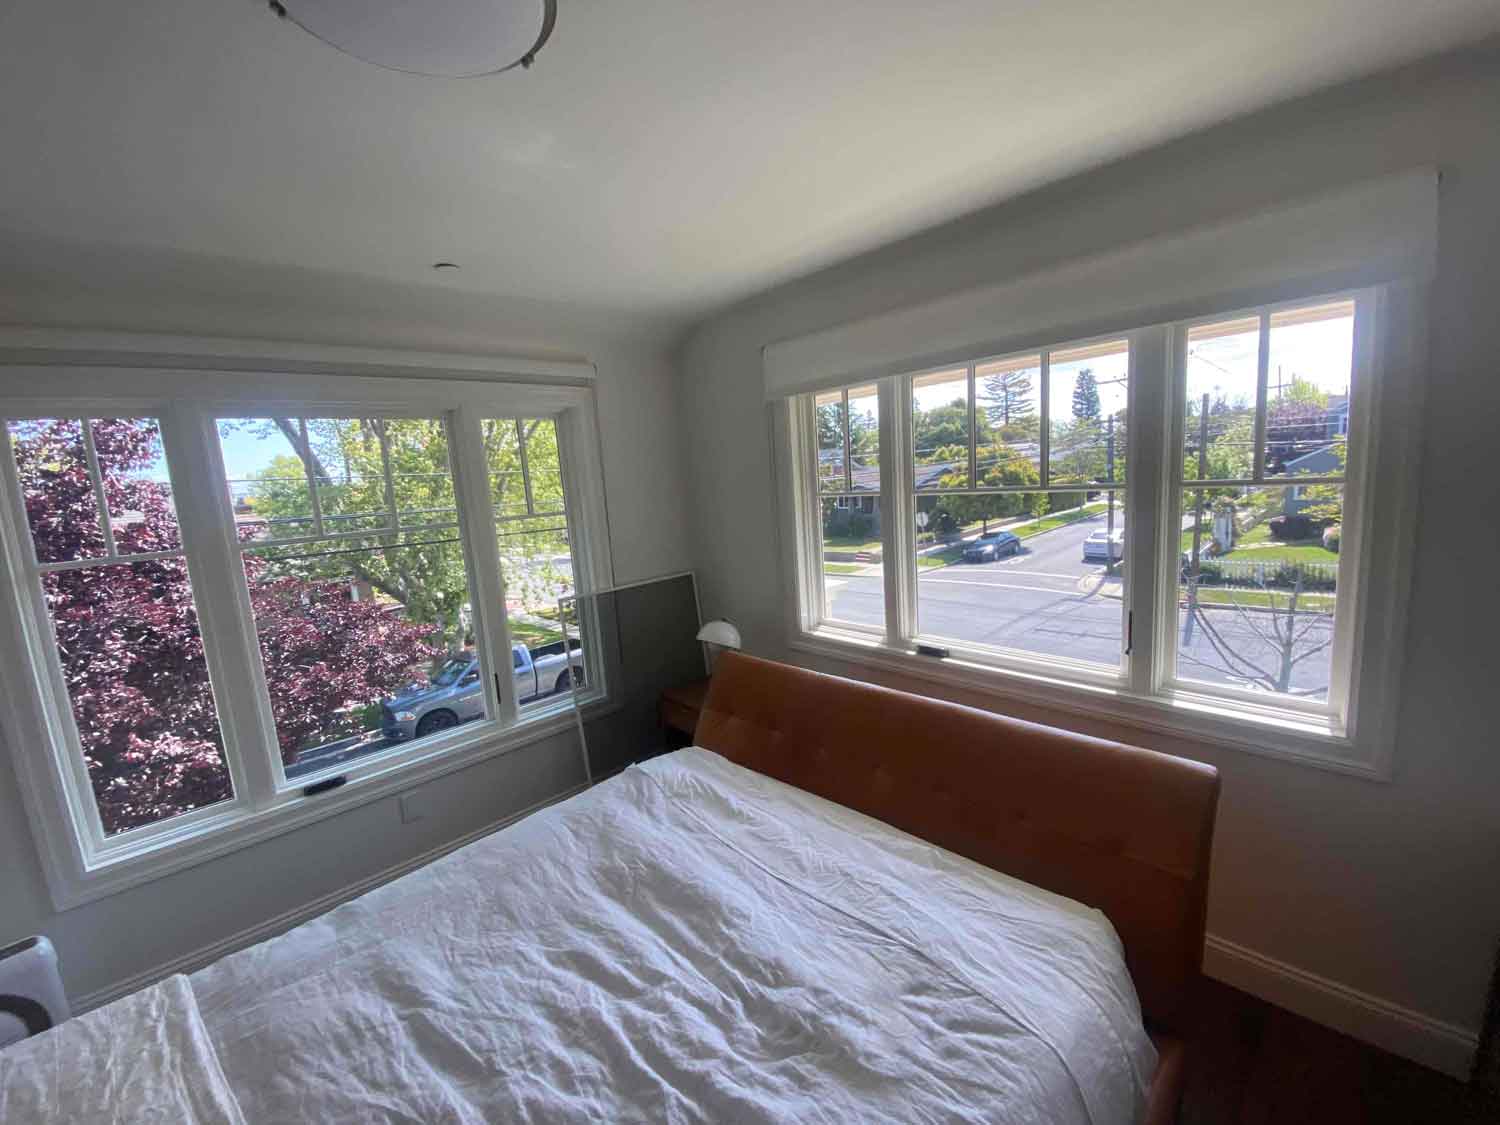 ClimatePro used two 3M window tints on this home in Burlingame, CA. Get a free estimate today.